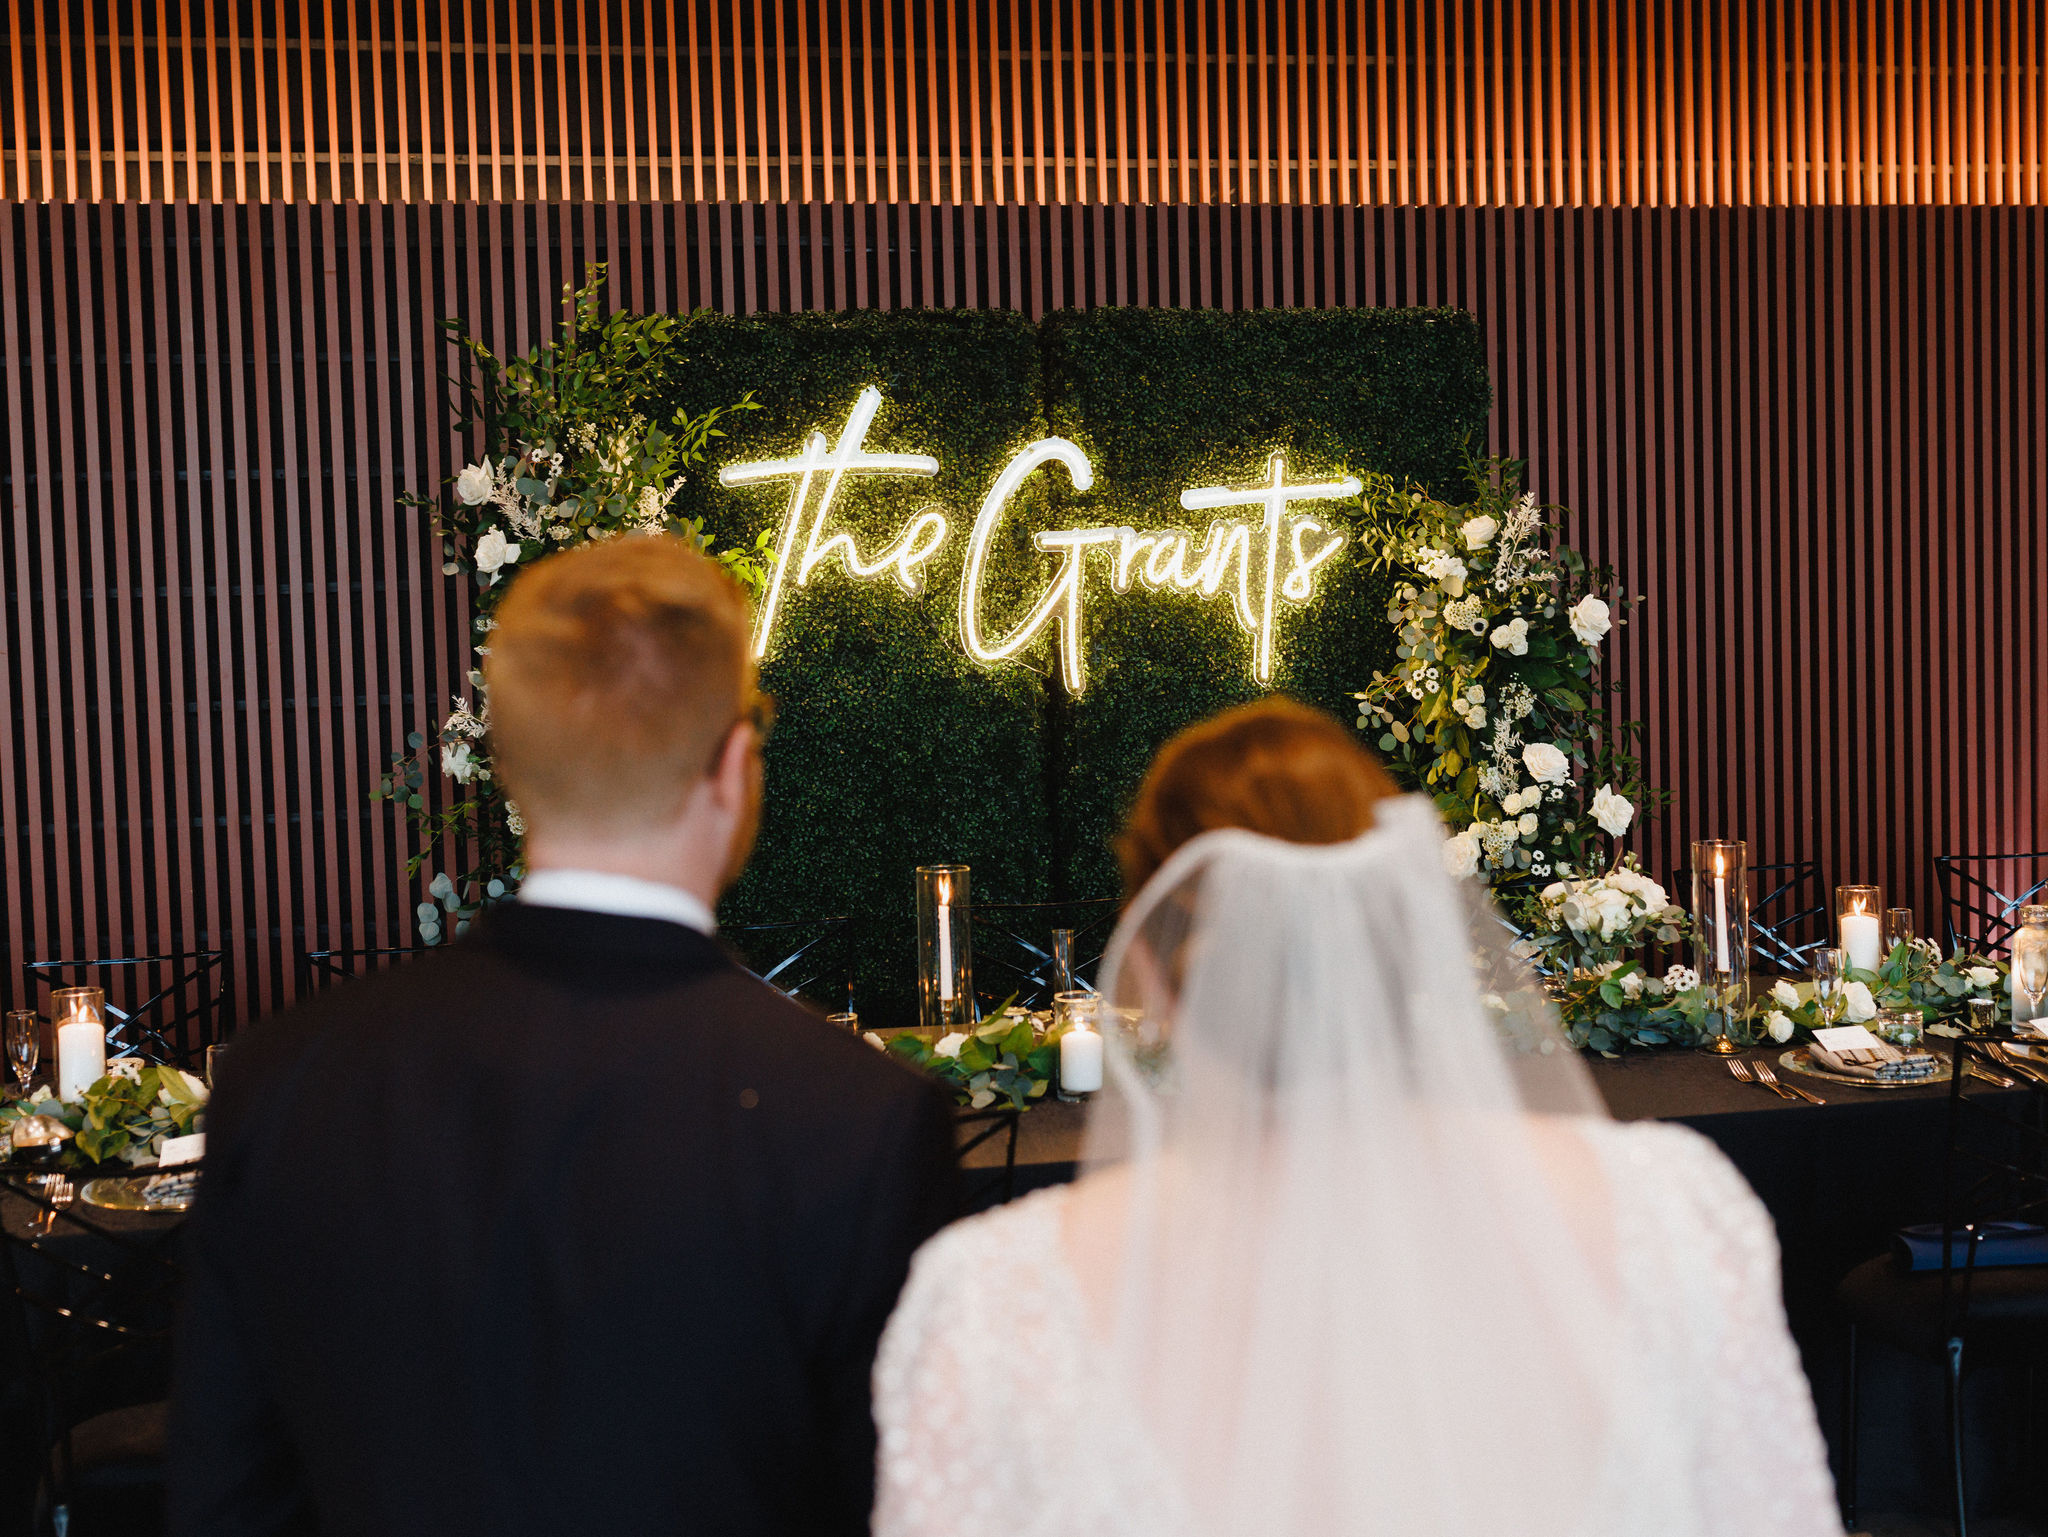 Katie and Bobby see their sweetheart table with neon sign reading "The Grants"